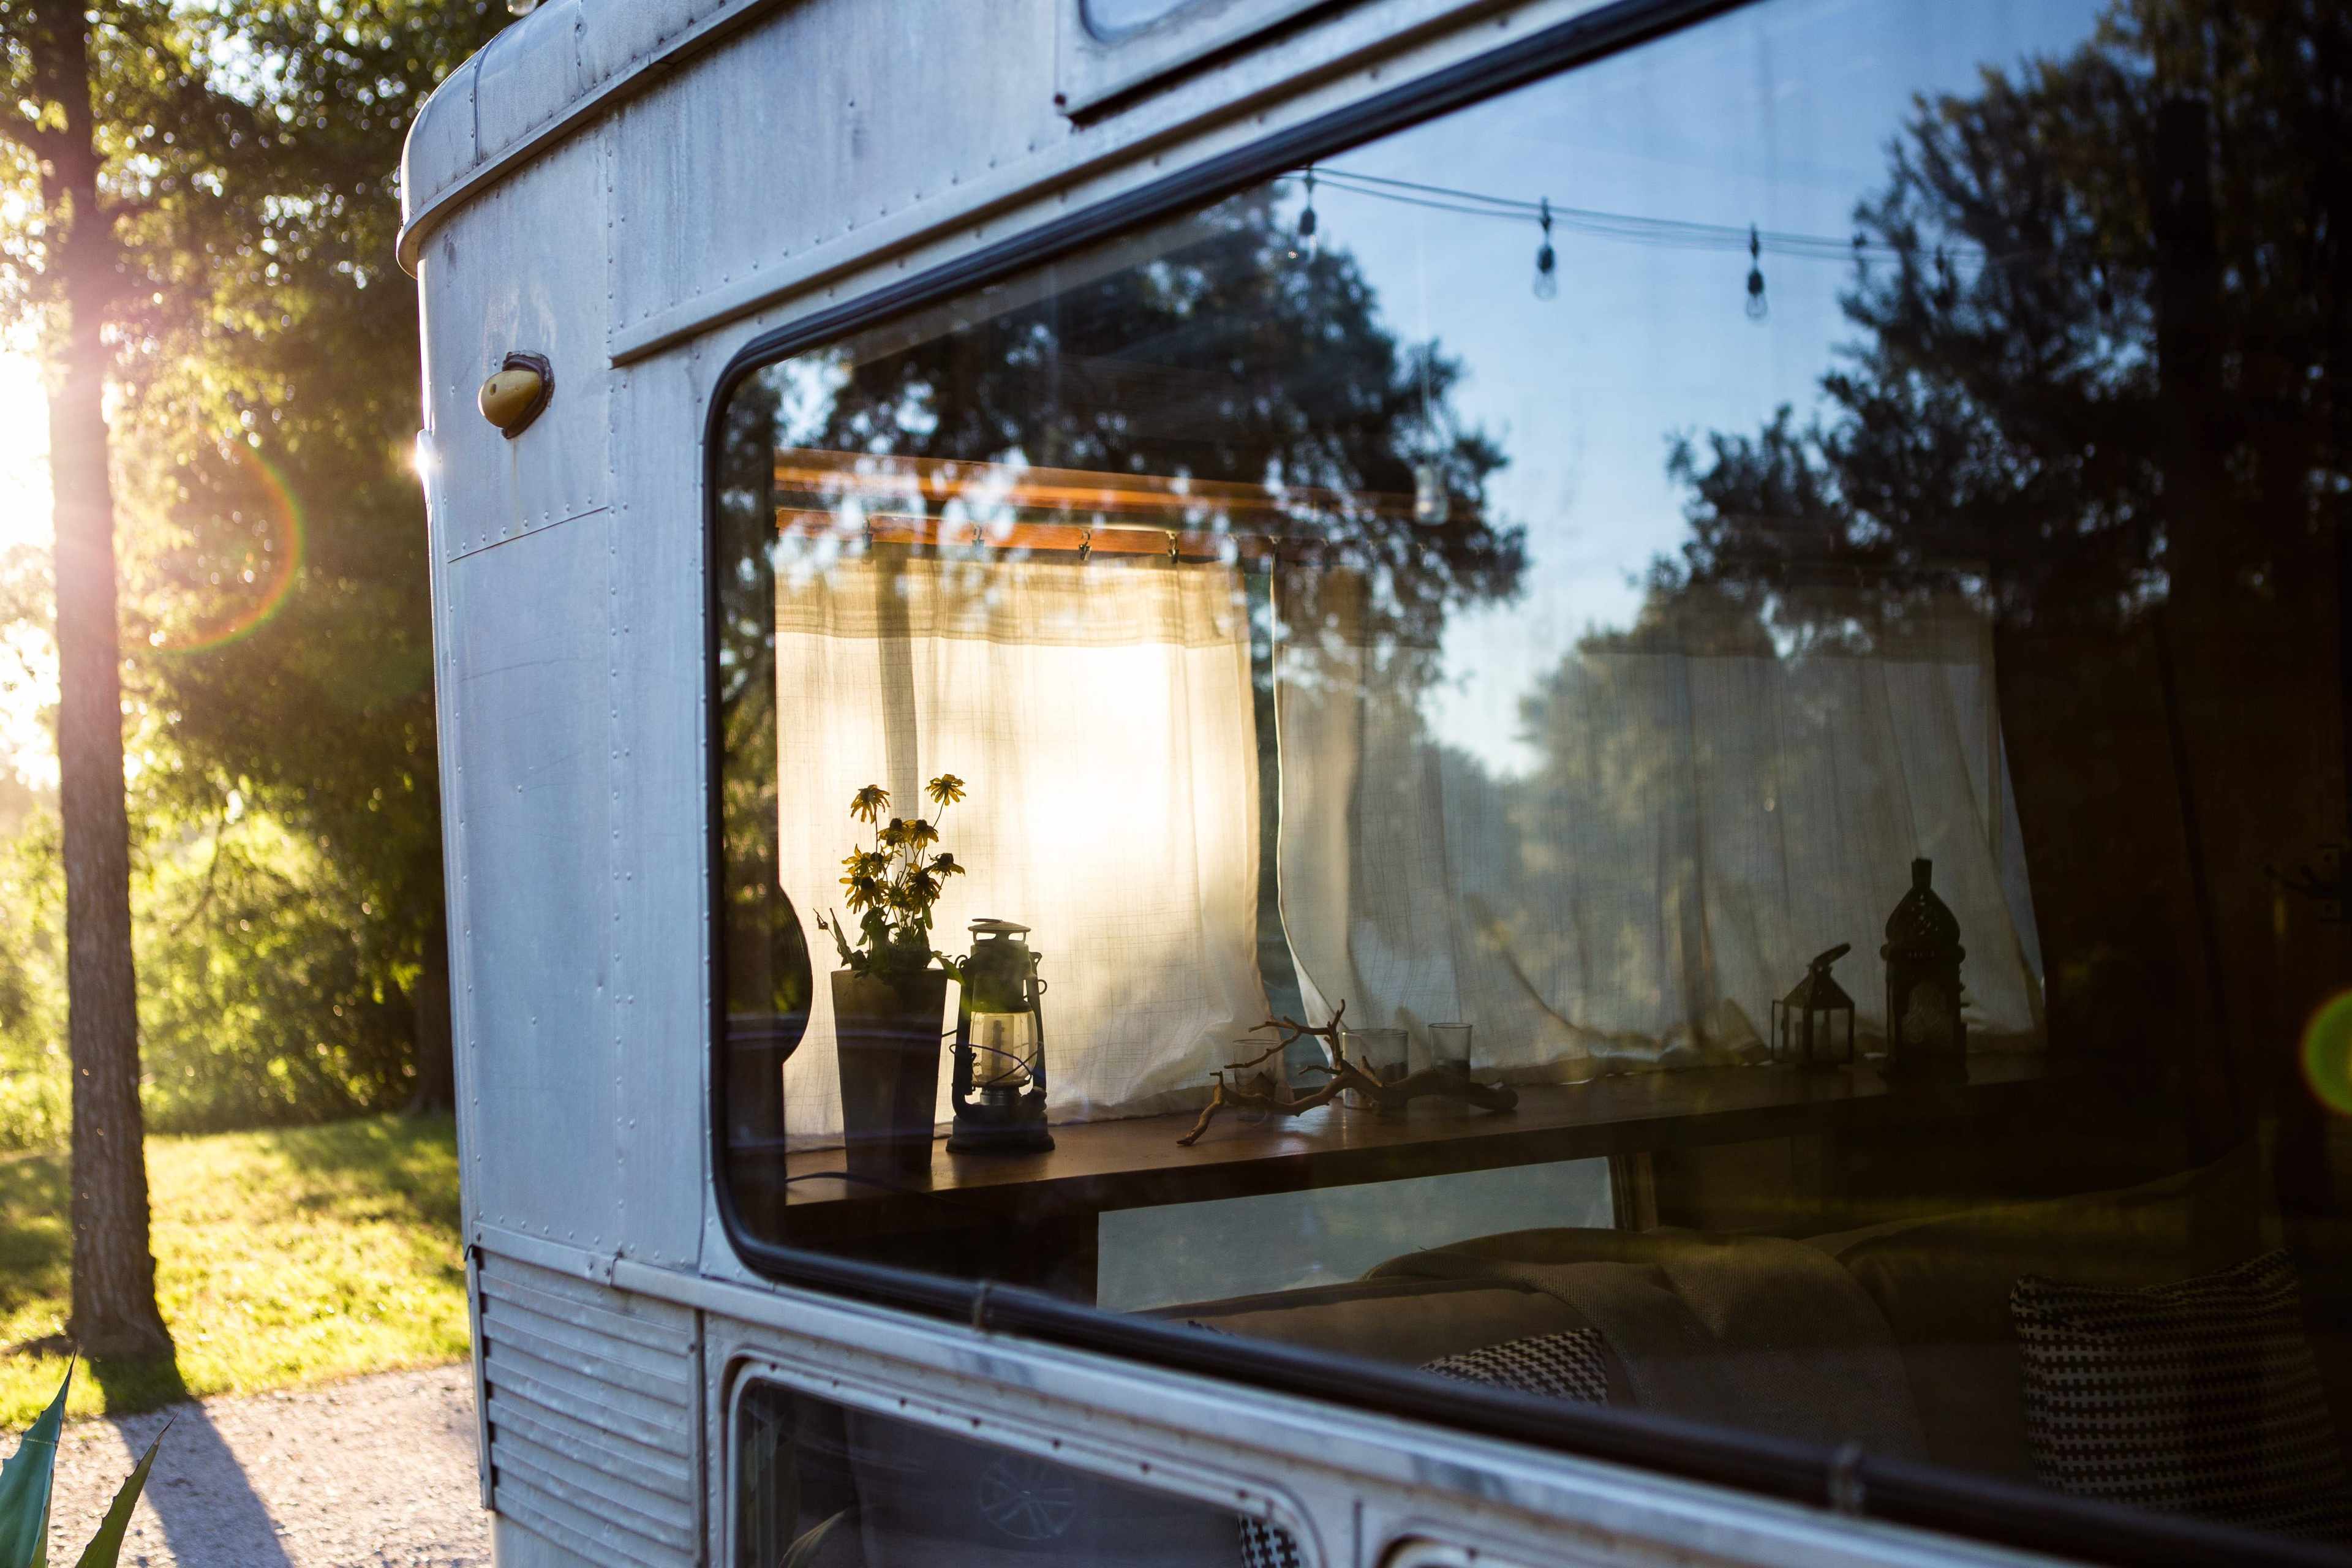 7 Must-Have Props to Stage Your RV in Listing Photos